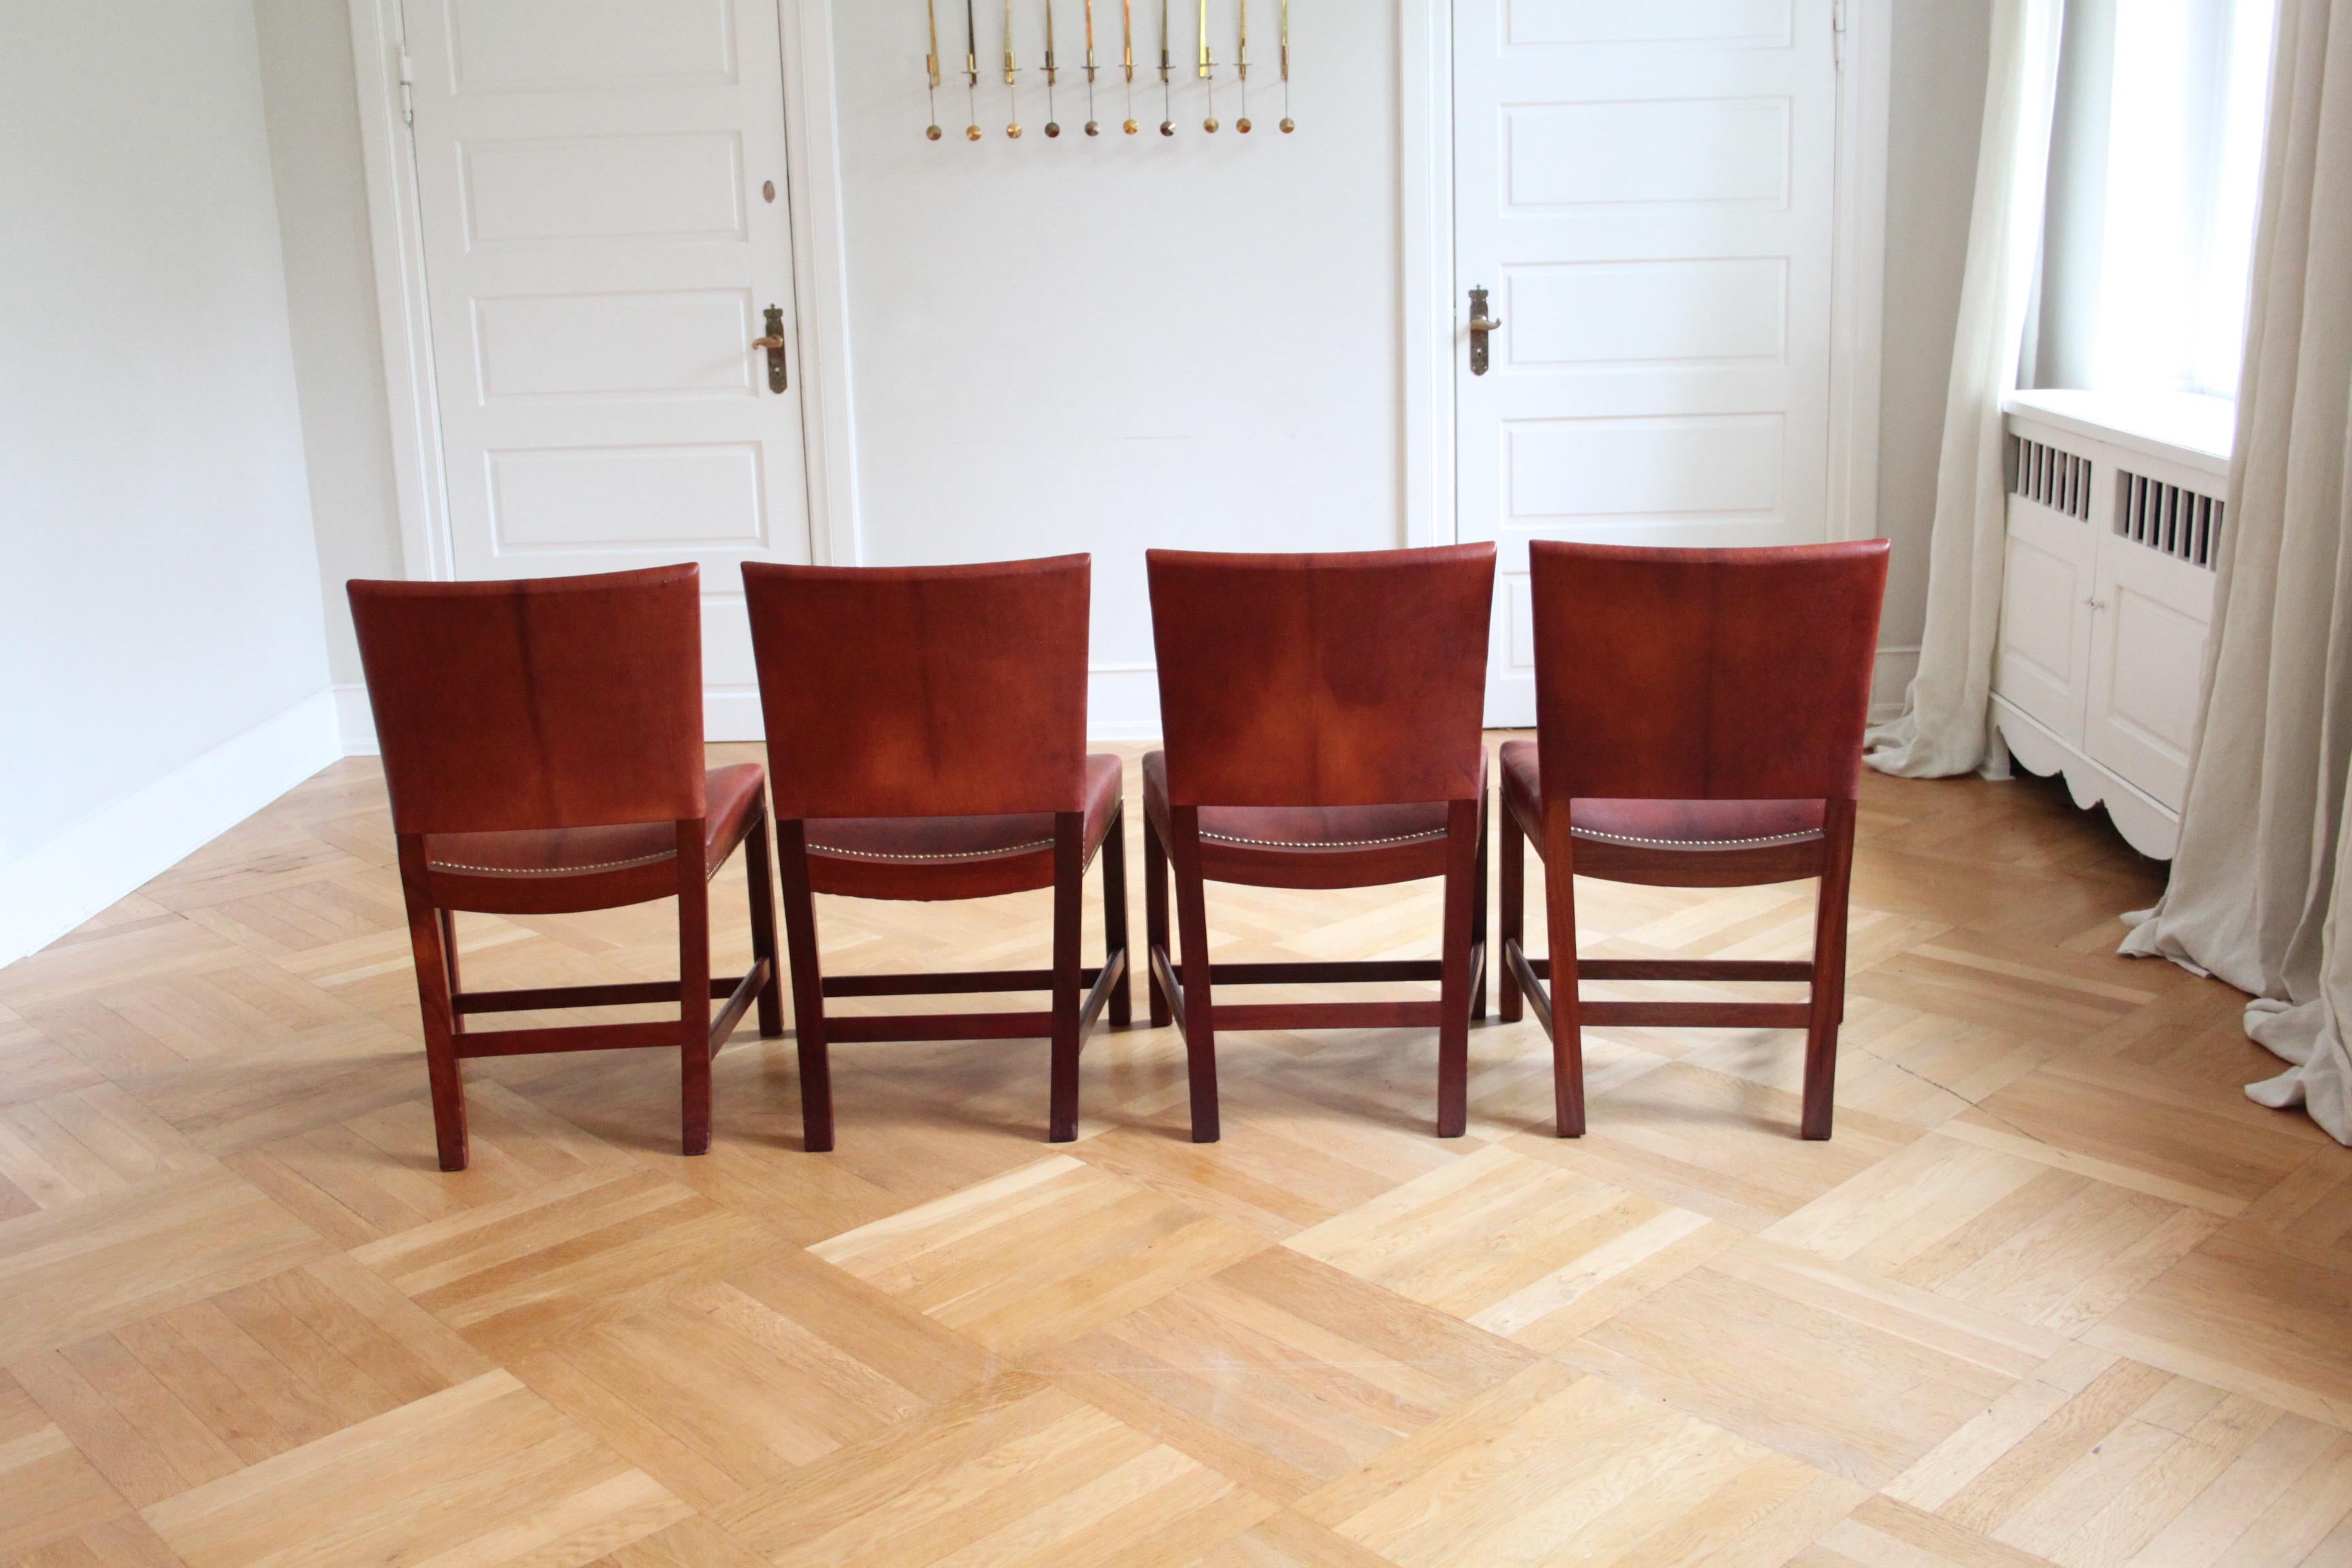 Oiled Set of Twelve Kaare Klint Red Chairs, Rud Rasmussen, Niger Leather and Mahogany For Sale